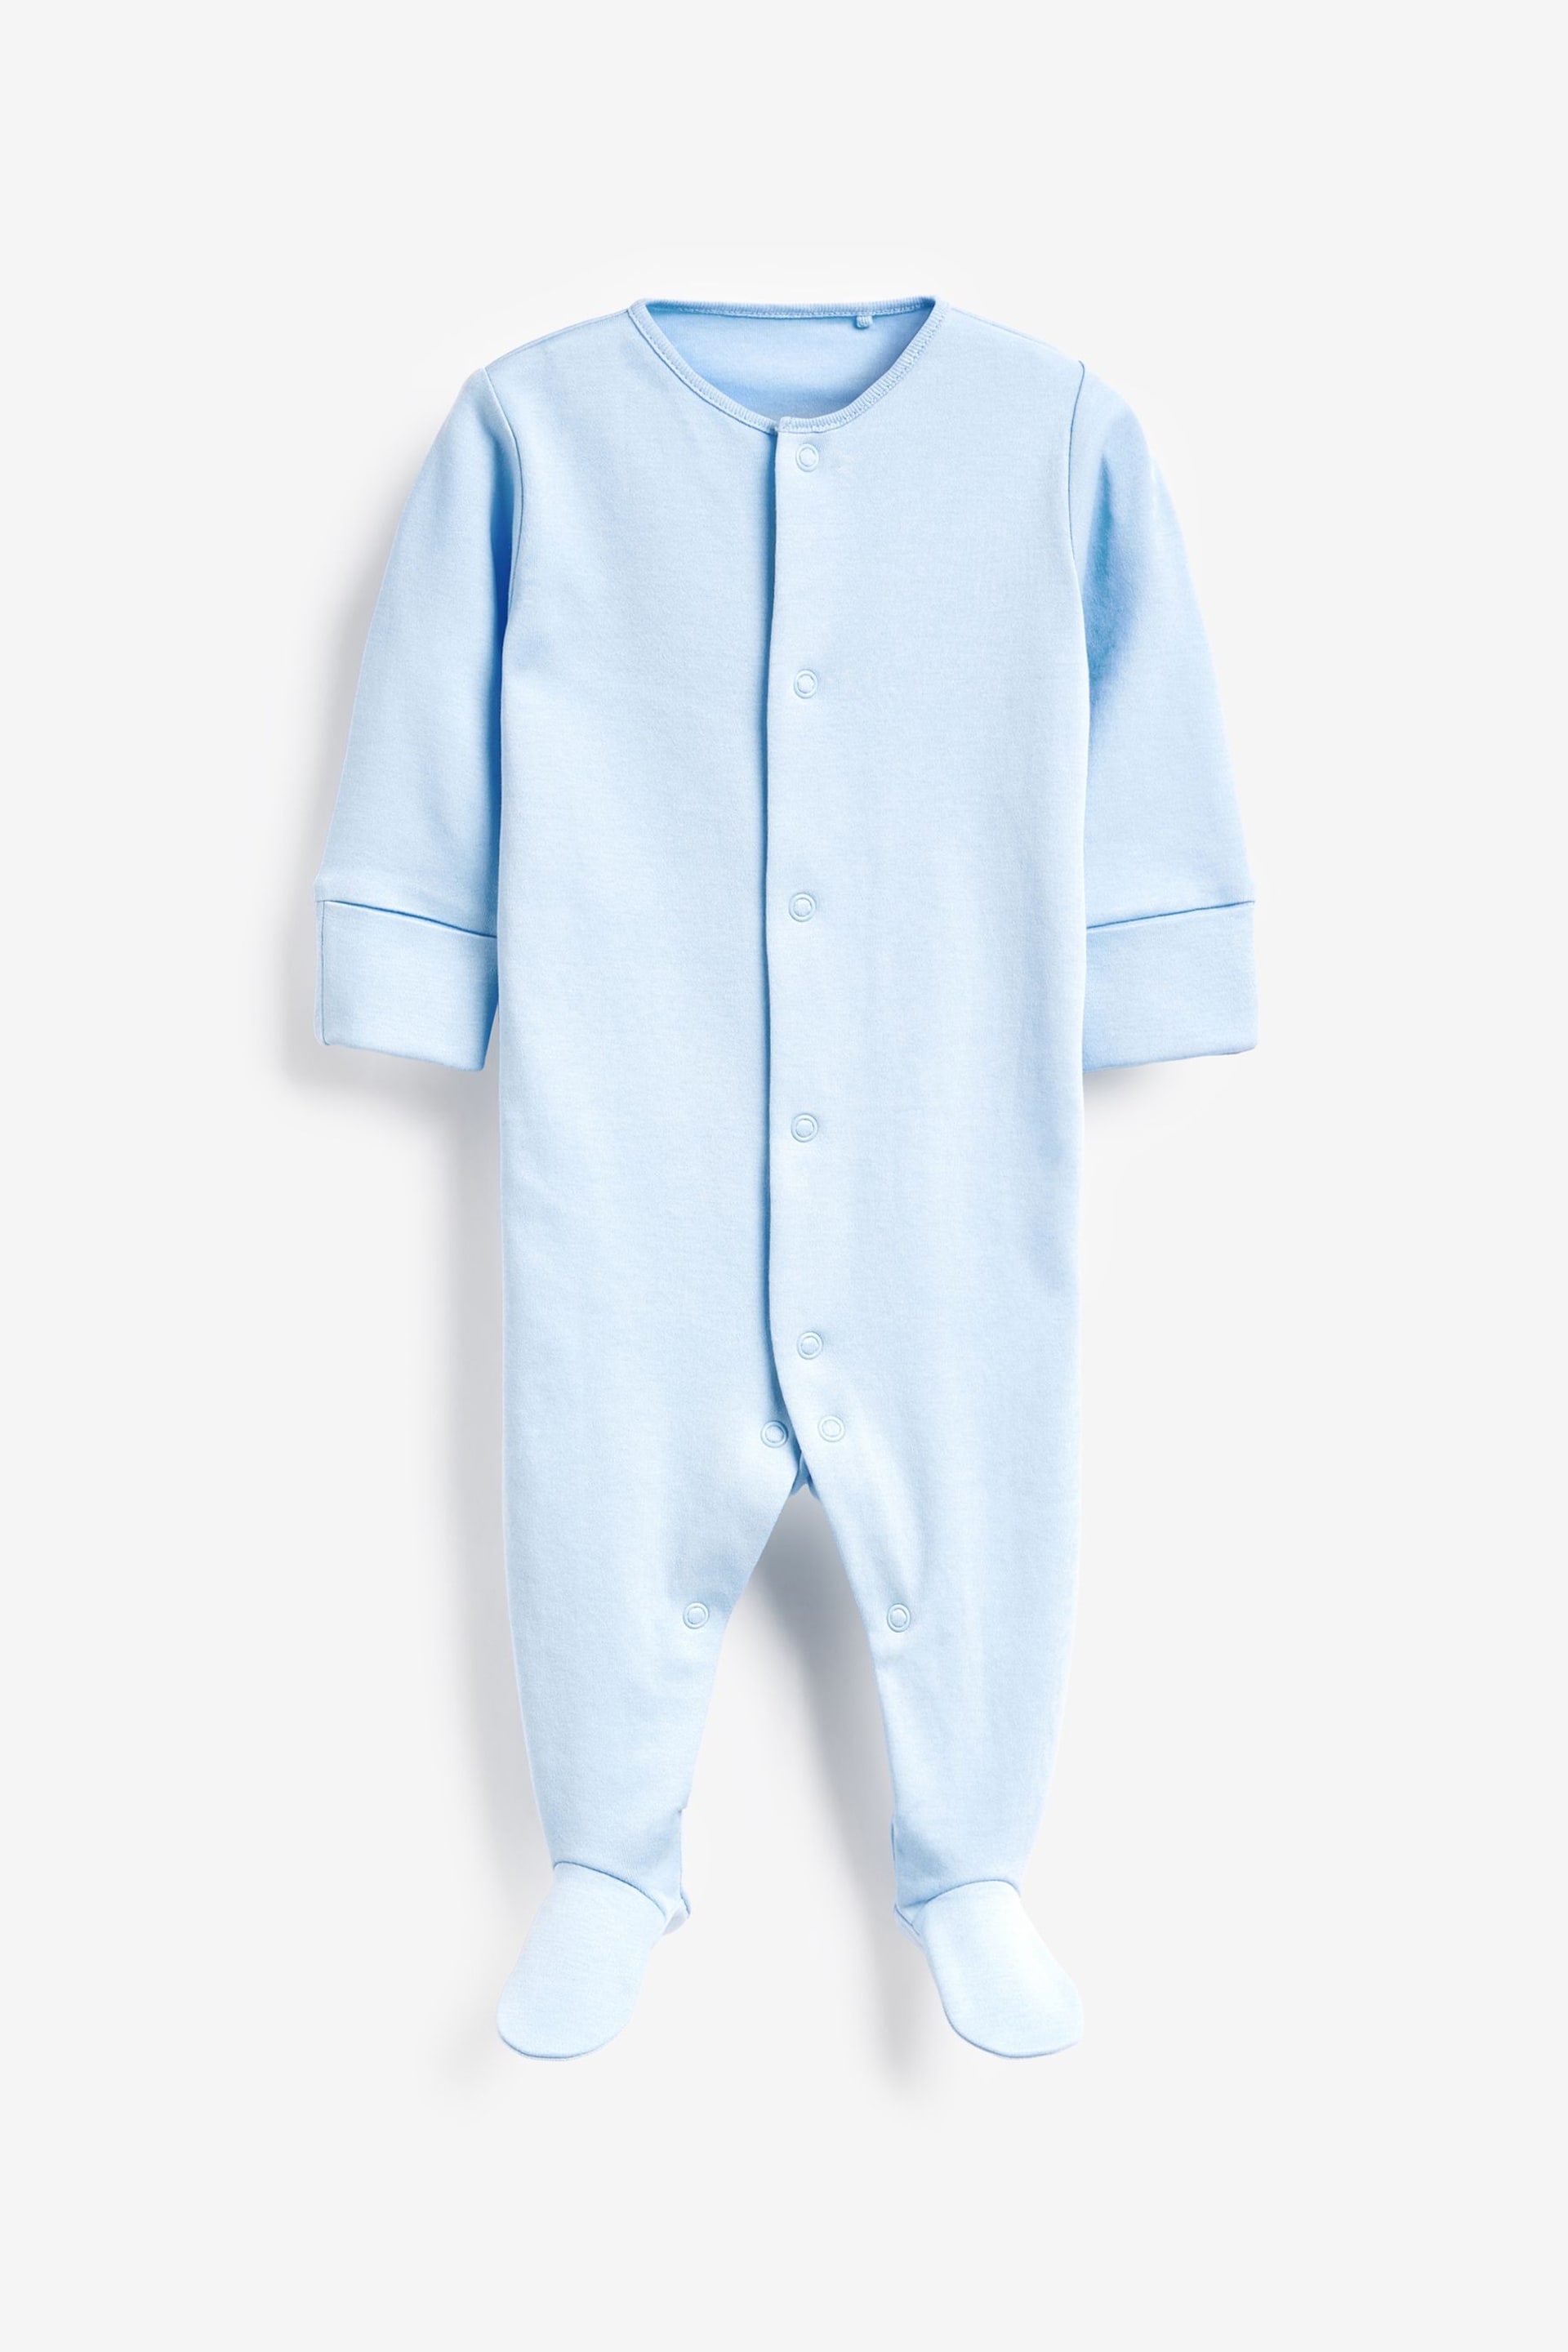 Blue/White 5 Pack Cotton Baby Sleepsuits (0-2yrs) - Image 5 of 7